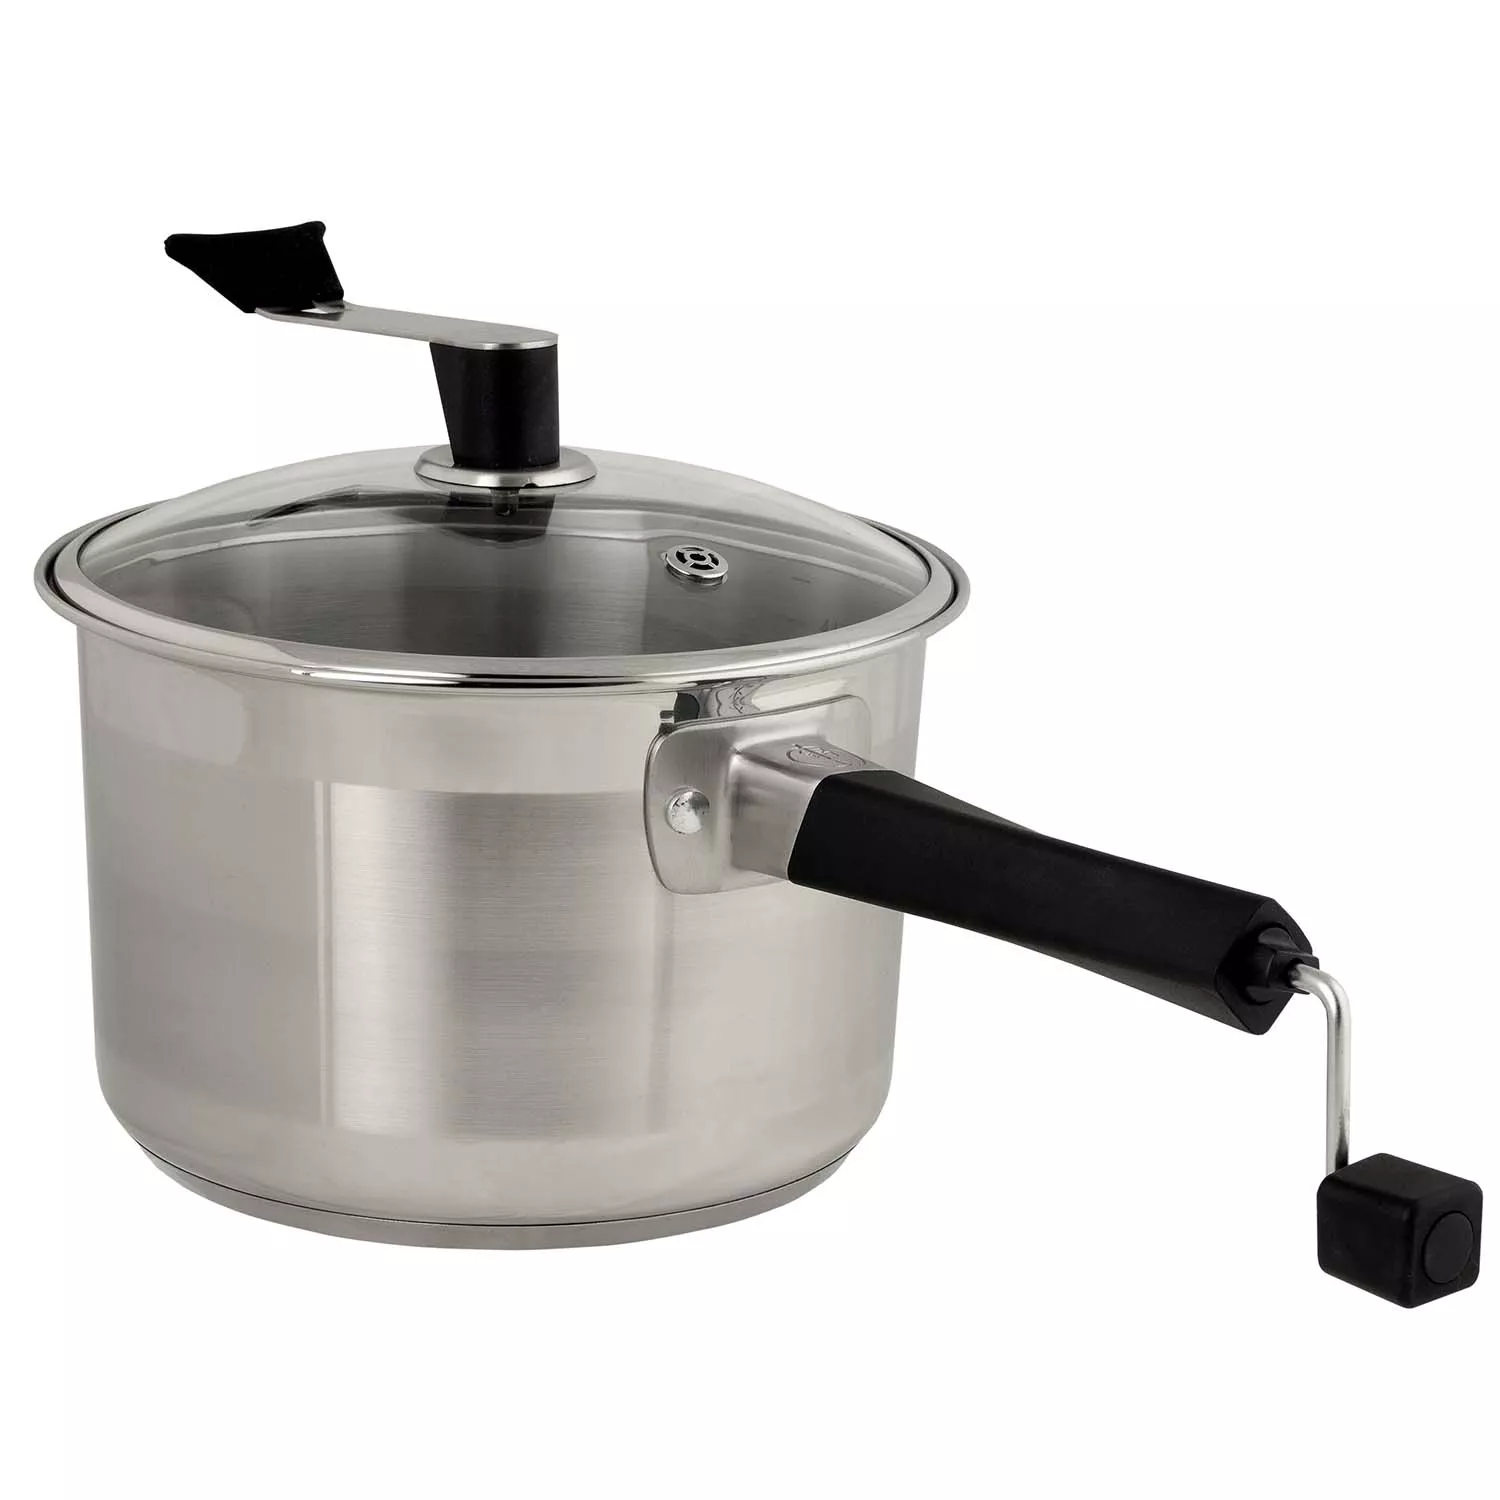 Whirly Pop Stainless Steel Platinum Series Popcorn Popper and Snack Maker